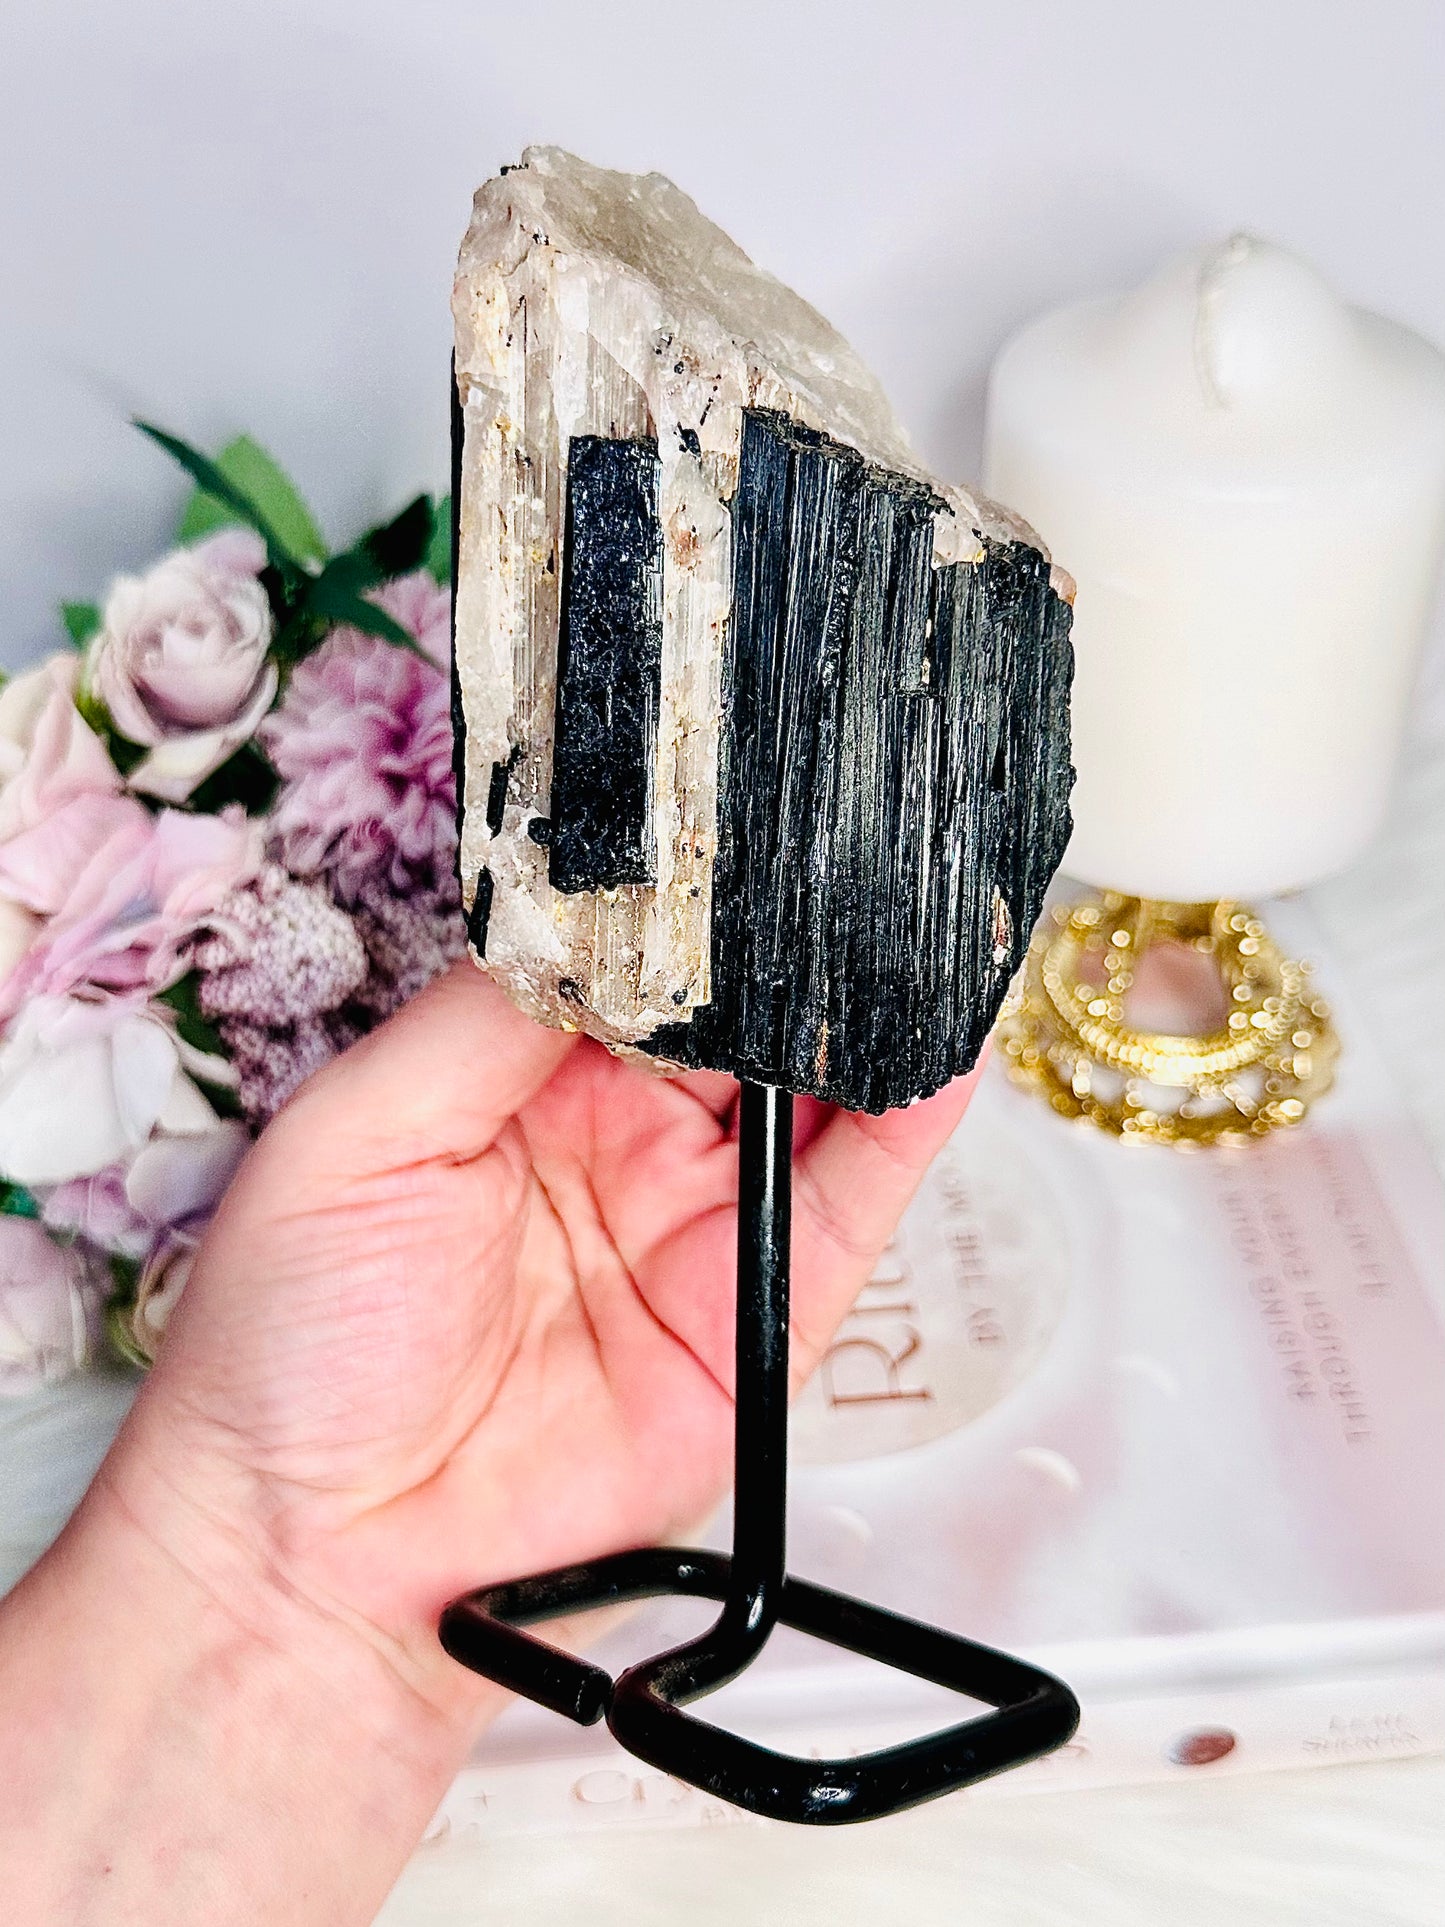 A Protective Stone ~ Gorgeous Large 18cm Natural Black Tourmaline In Quartz Specimen 629gram On Stand From Brazil